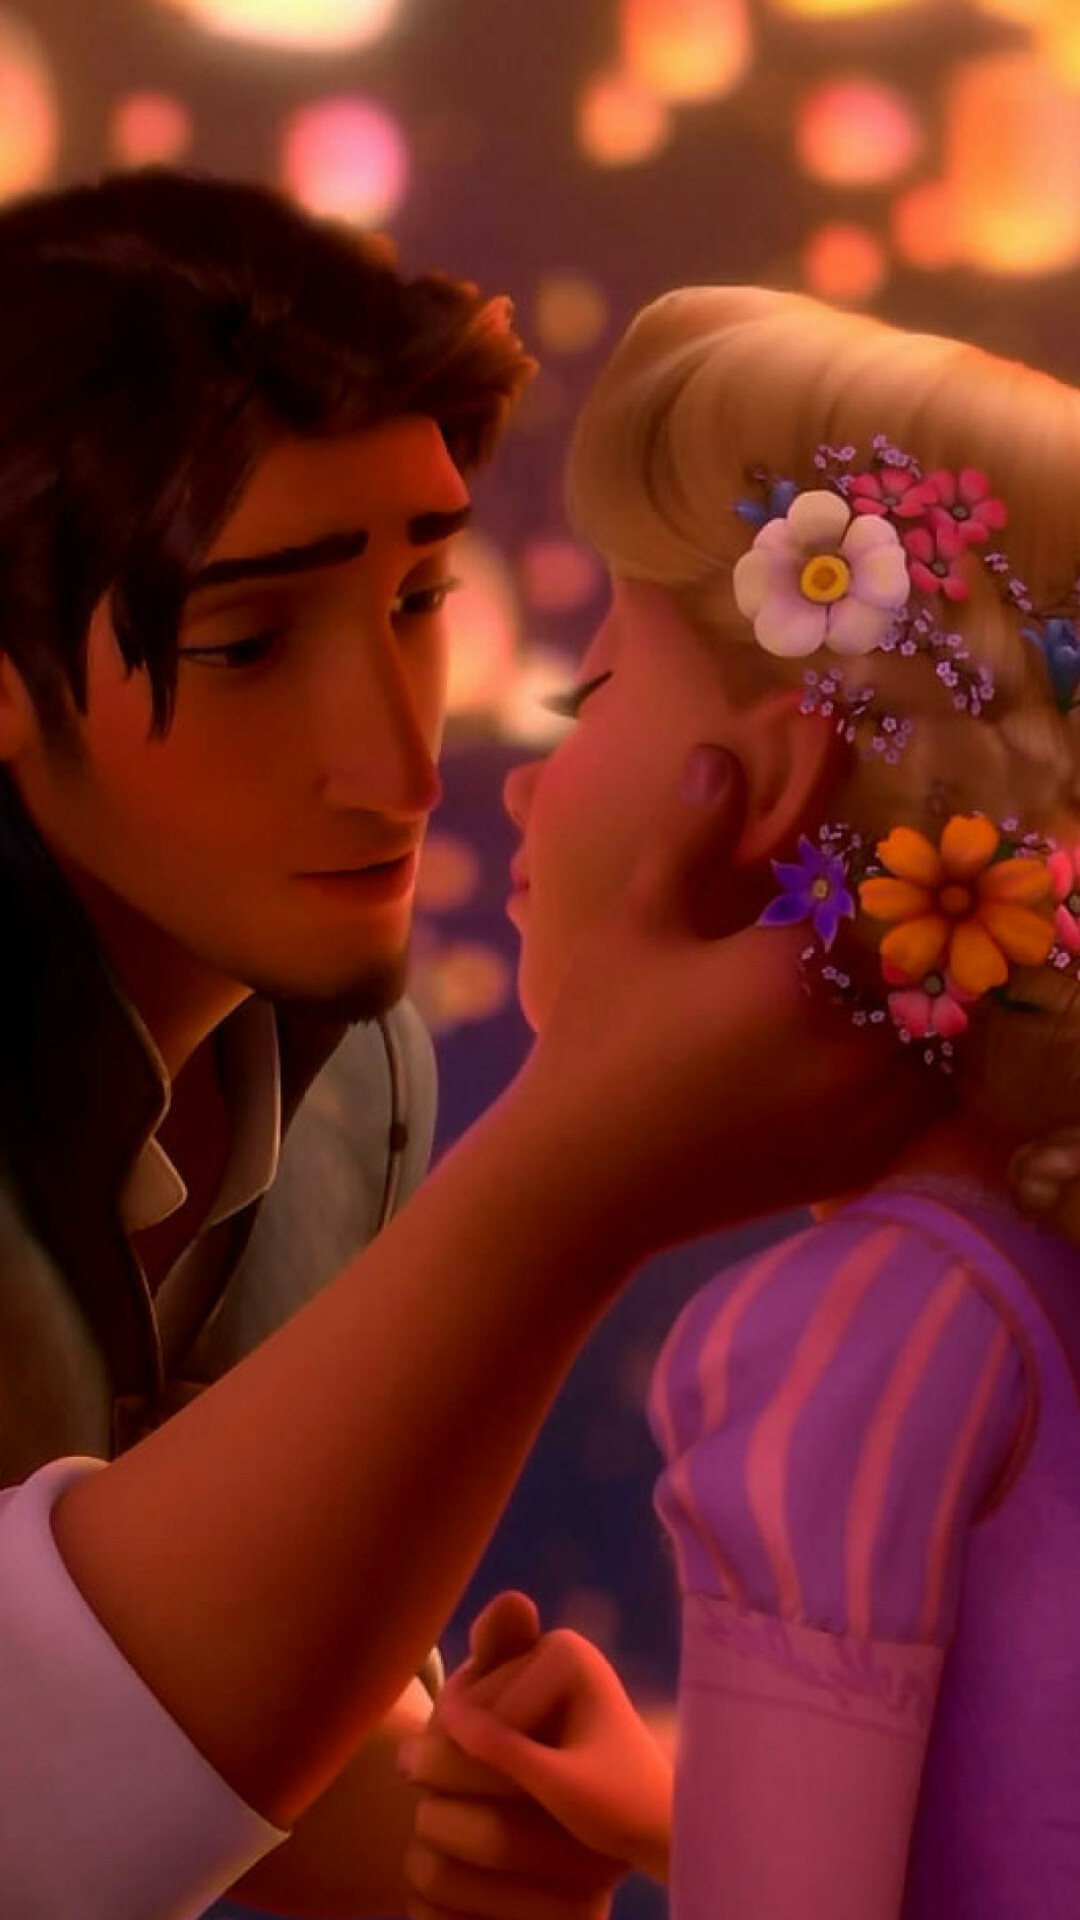 Tangled: Flynn Rider, Fictional character, The handsome thief, and captain of the guard. 1080x1920 Full HD Background.